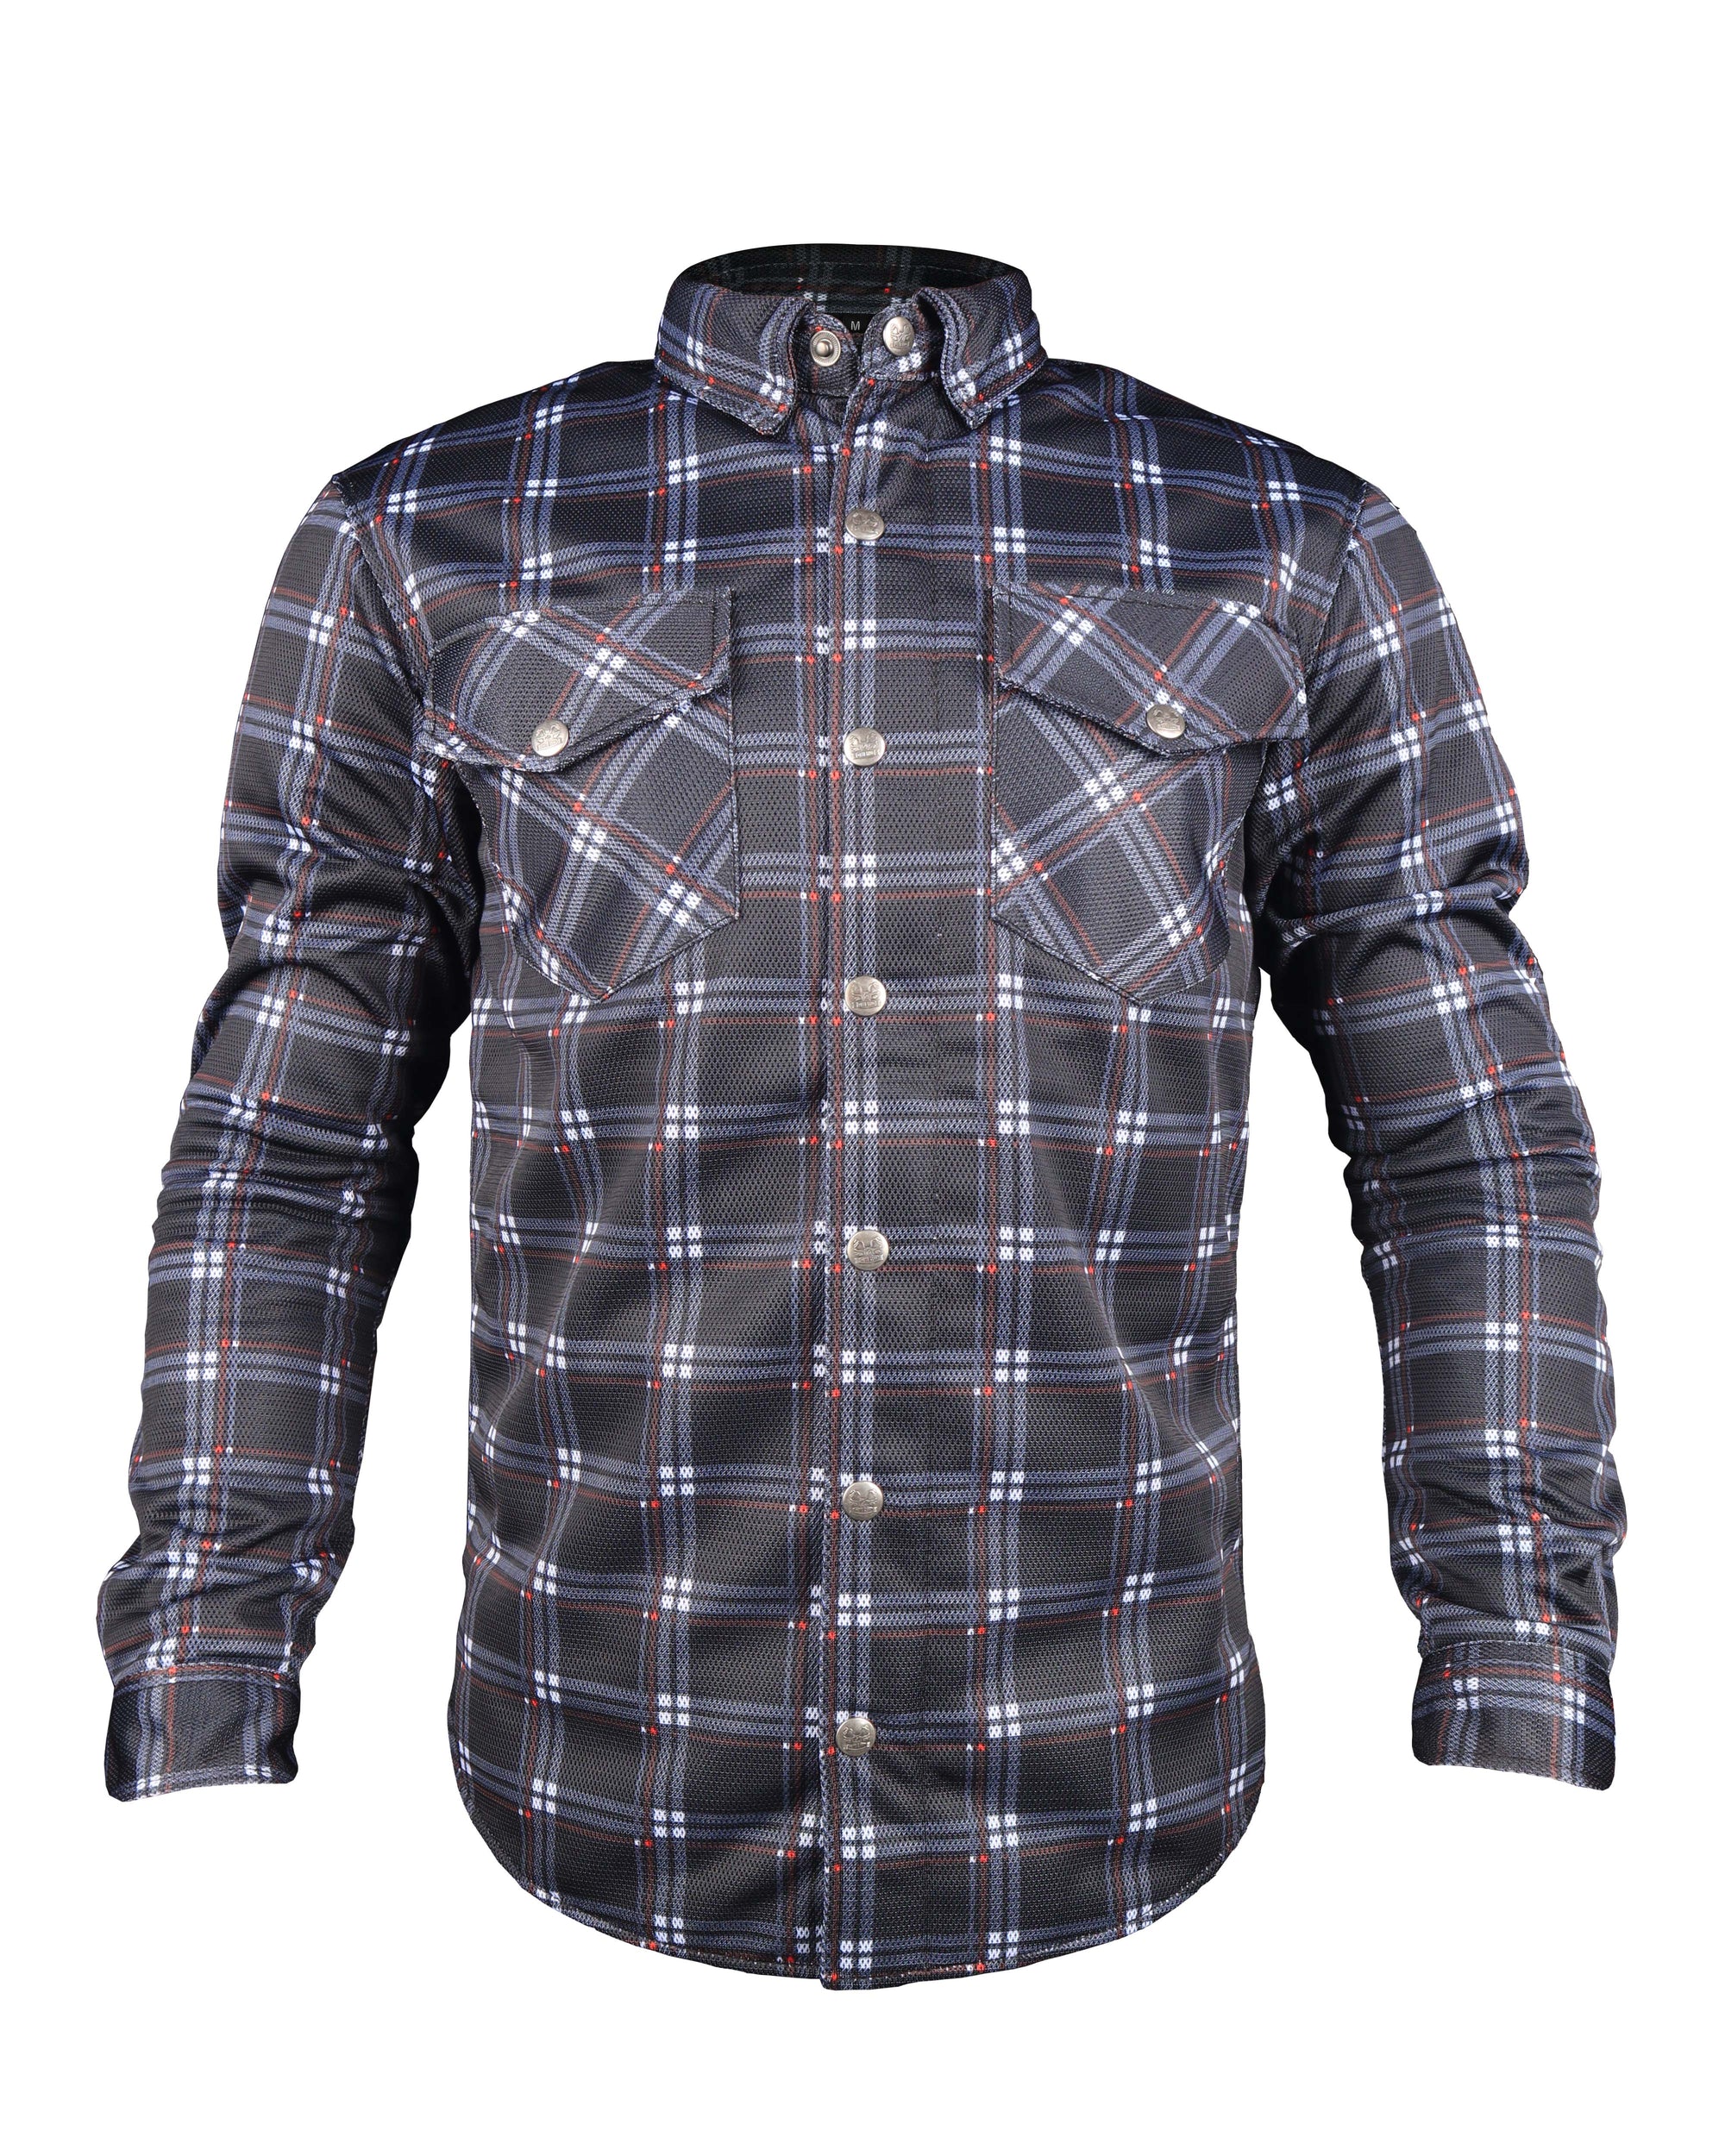 Dark blue check with red boxes Mesh Shirt